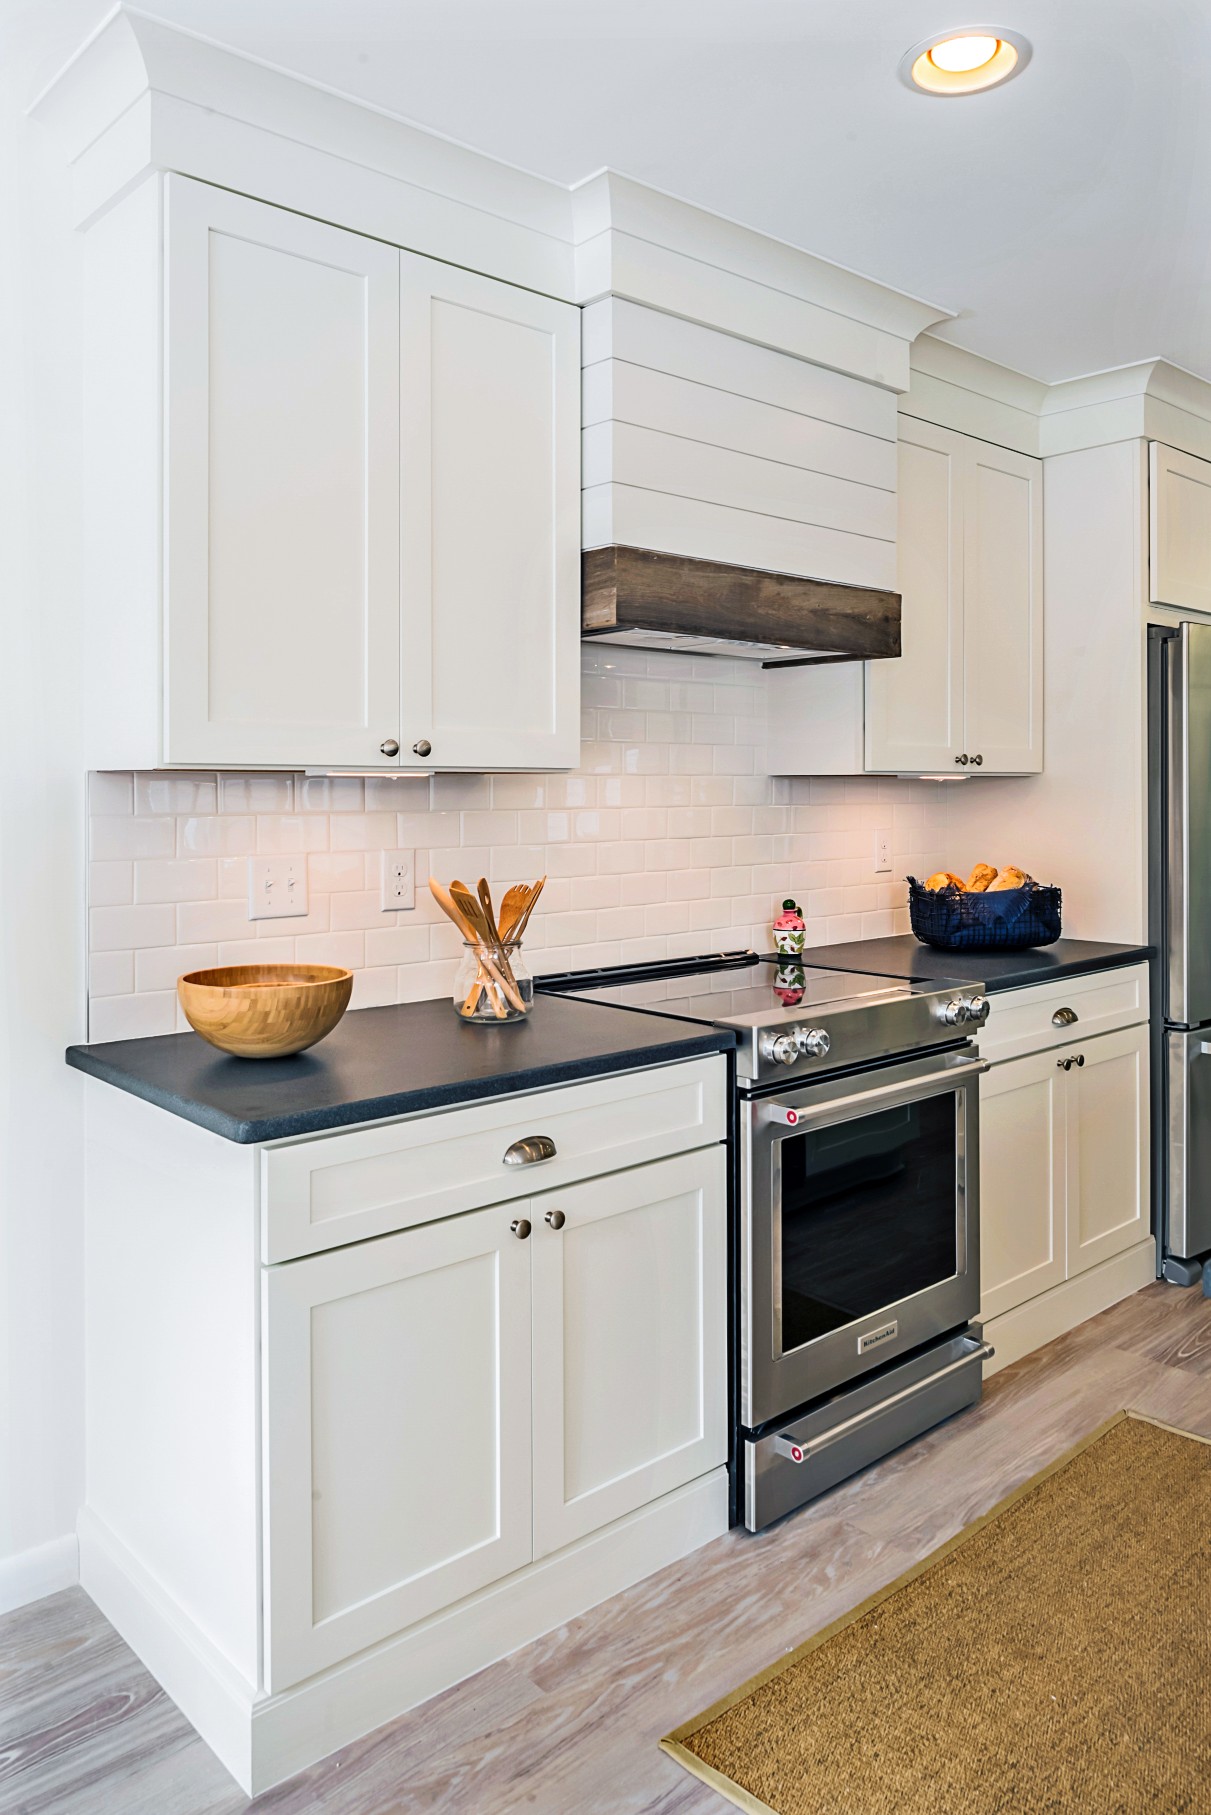 Kitchen in Wellington Parkway, Bethany Beach DE with White Cabinets, Black Granite Countertop and White Tile Backsplash